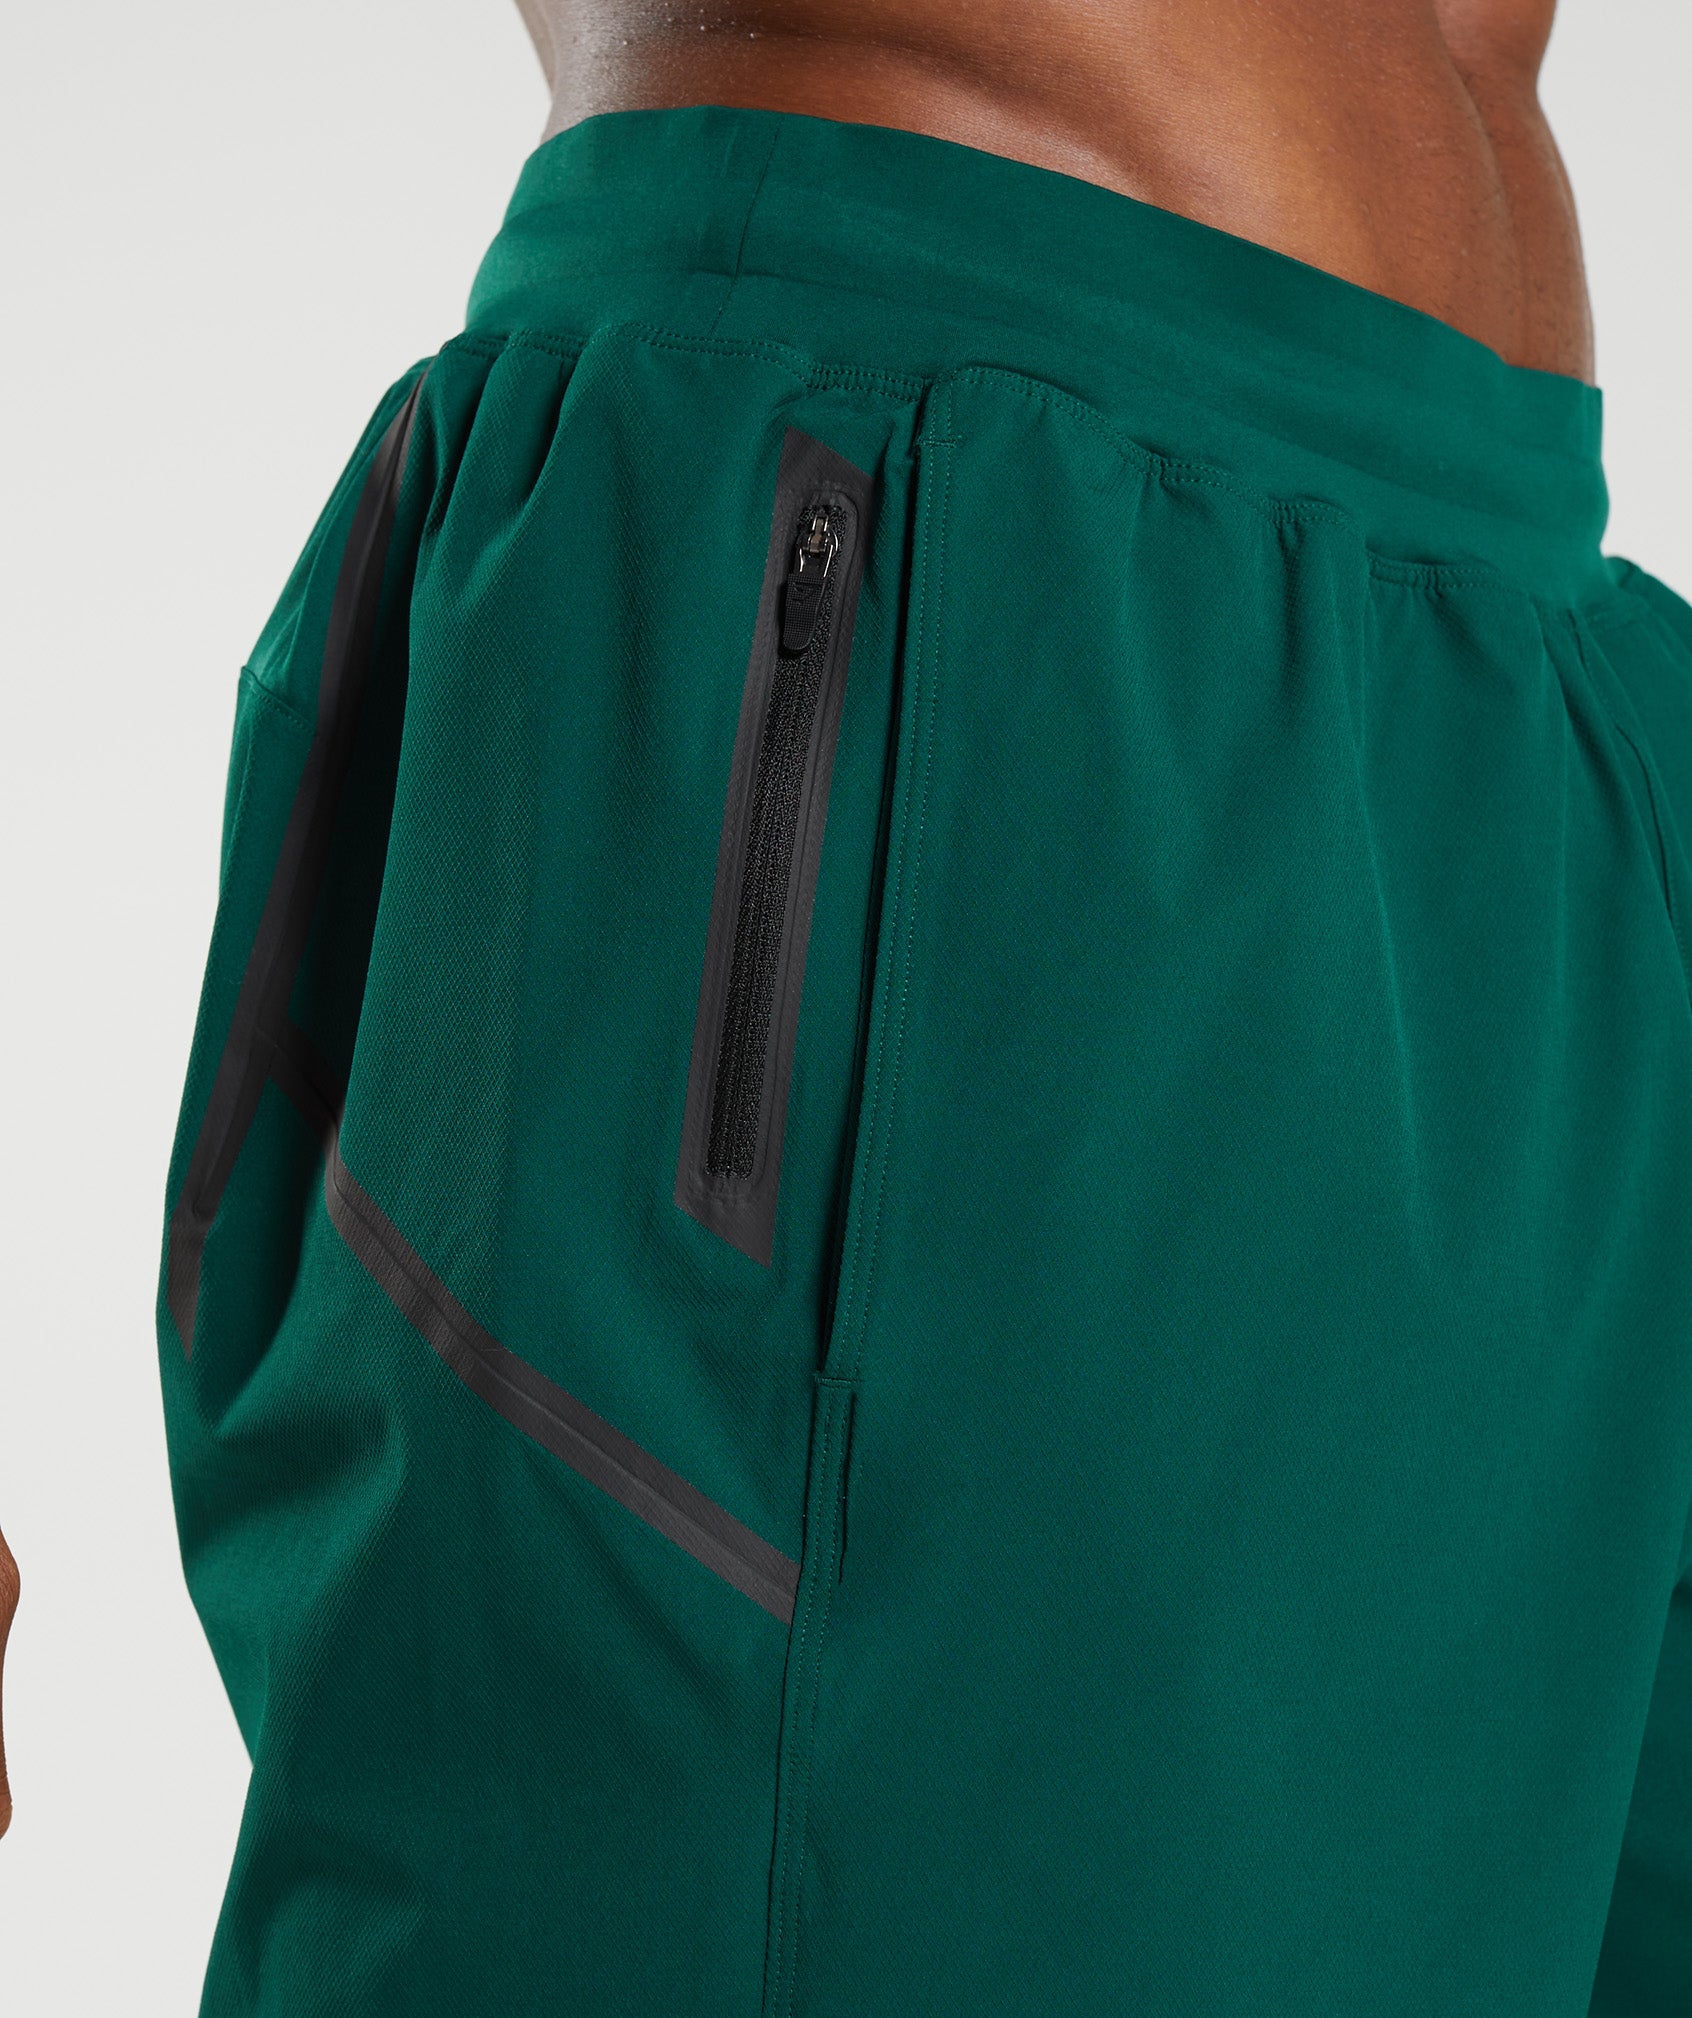 Apex 8" Function Shorts in Woodland Green - view 6